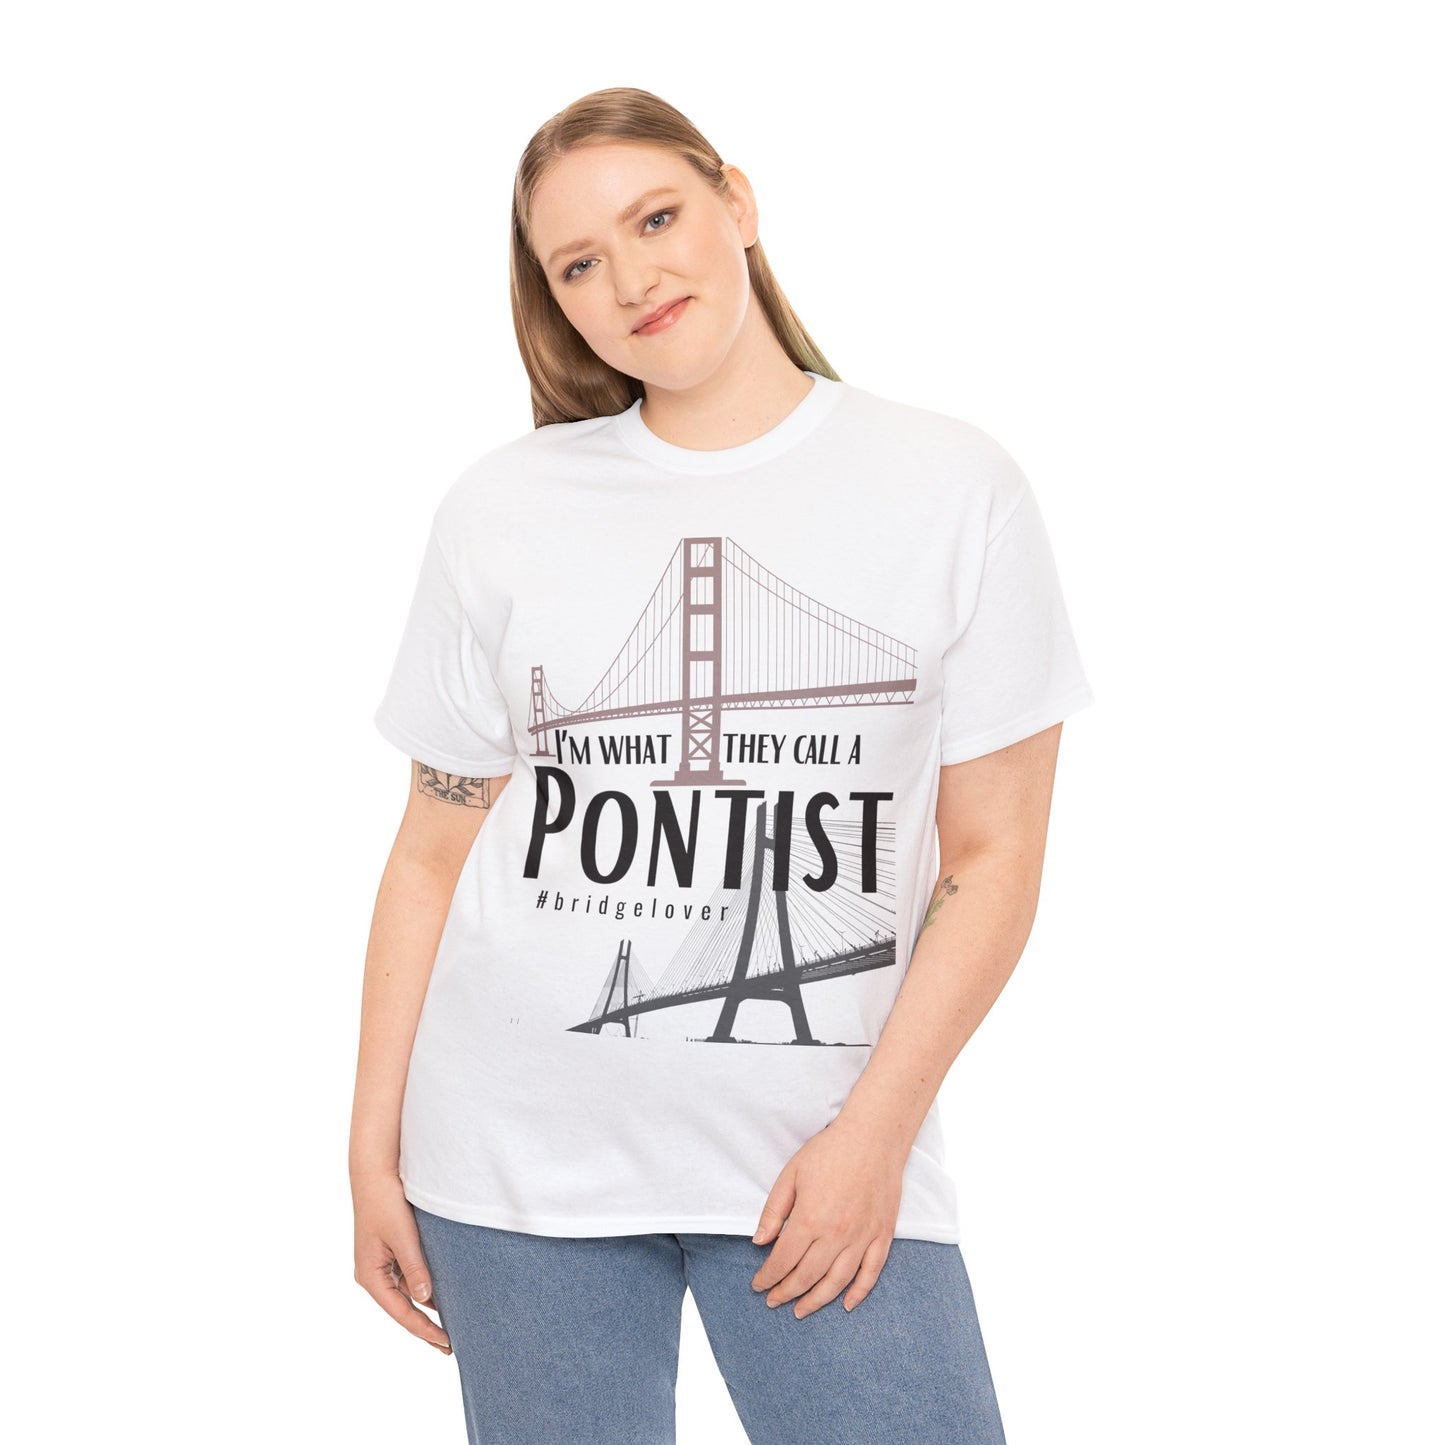 I’m What They Call a Pontist T-Shirt, Bridge Lover's Tee